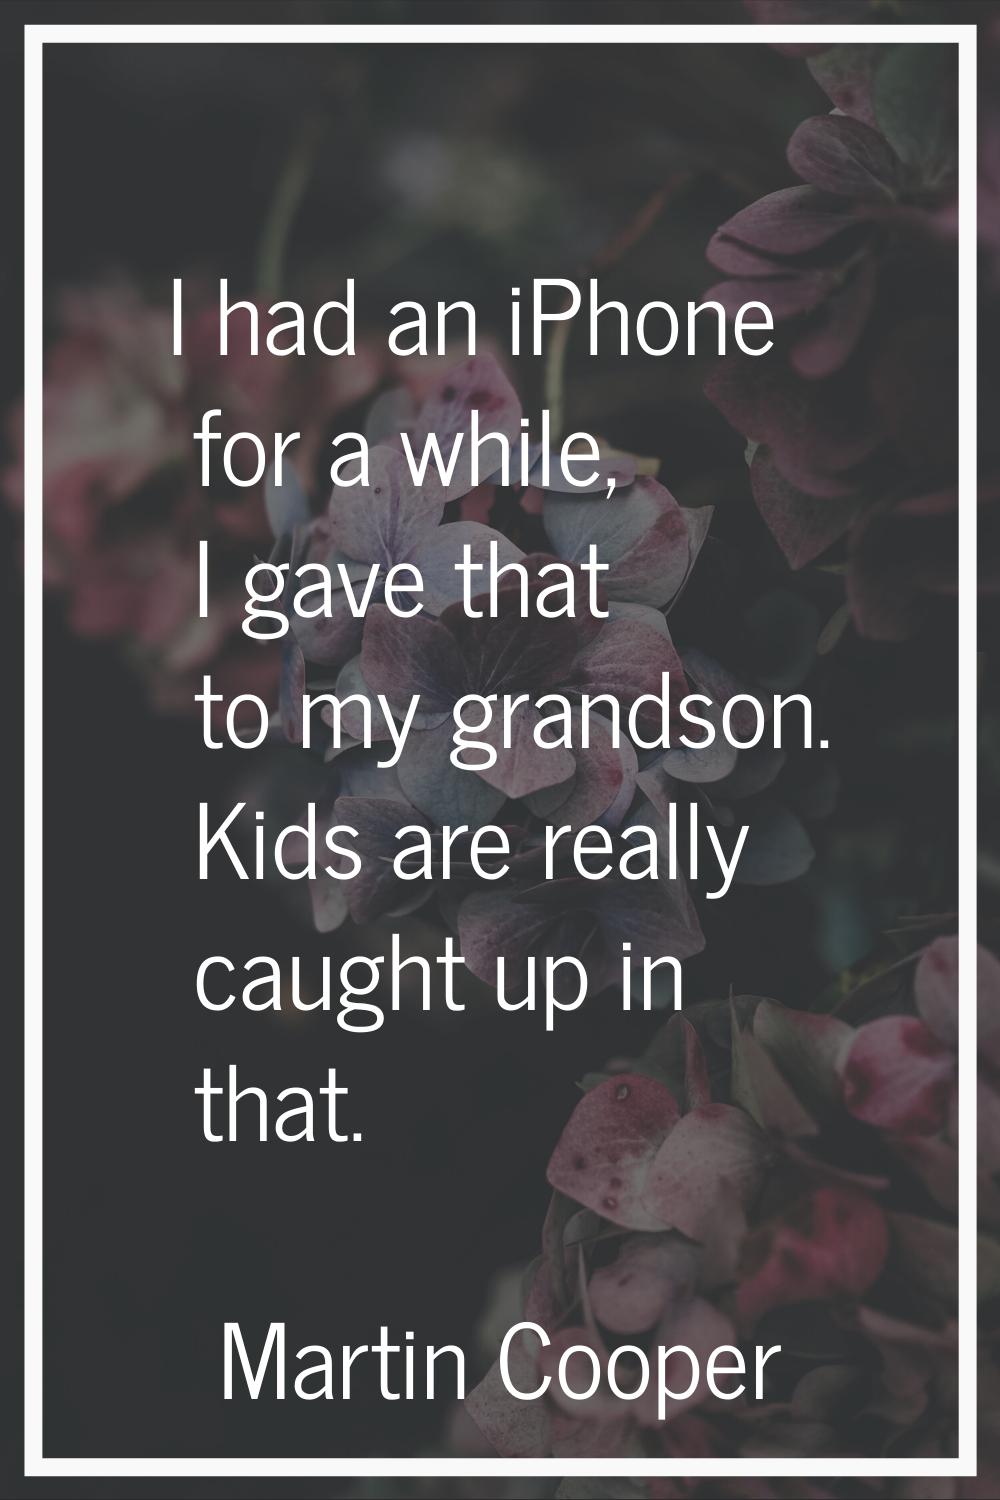 I had an iPhone for a while, I gave that to my grandson. Kids are really caught up in that.